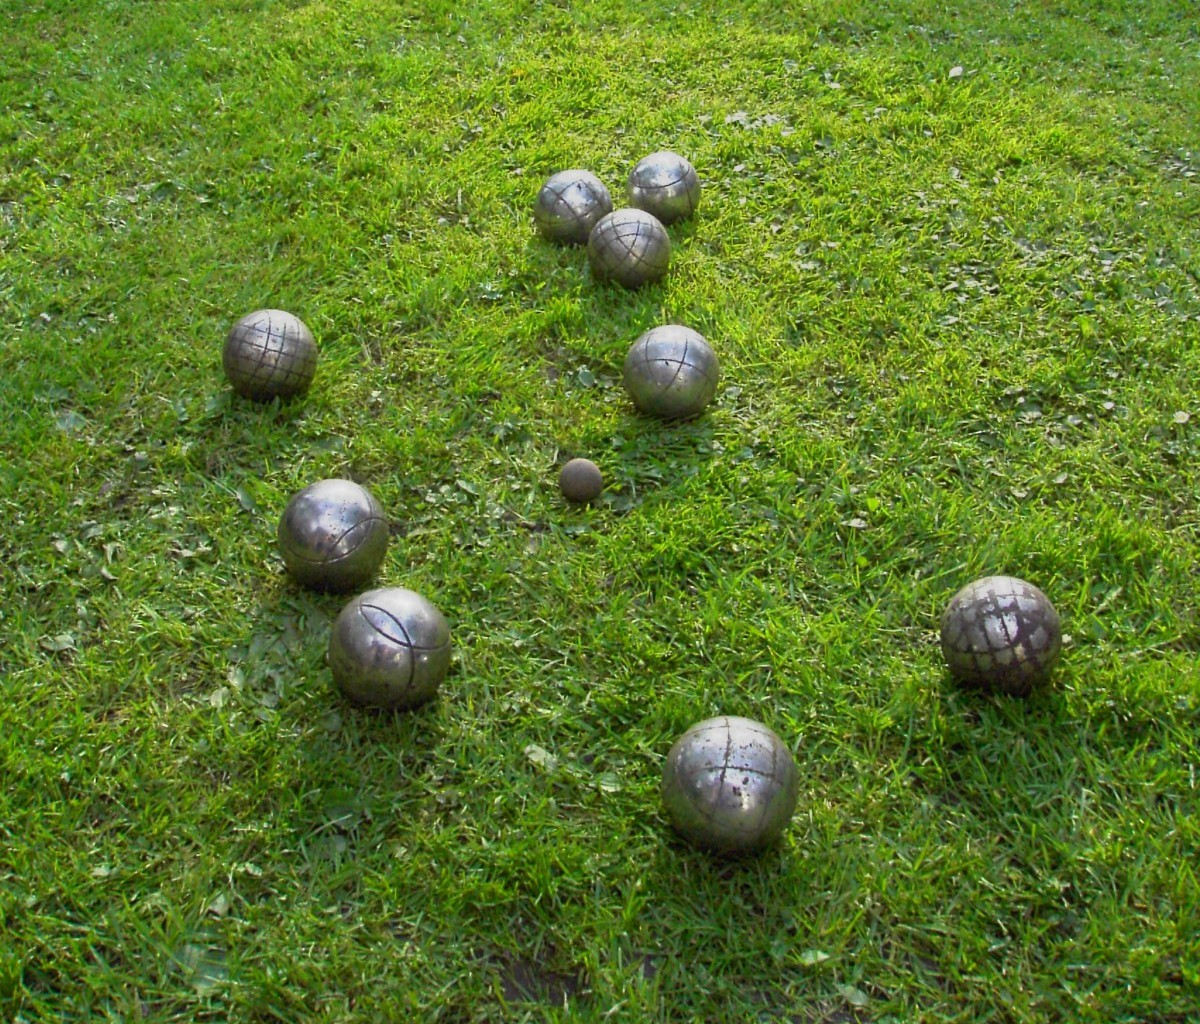 « Boule on grass ». Licensed under CC BY-SA 3.0 via Wikimedia Commons